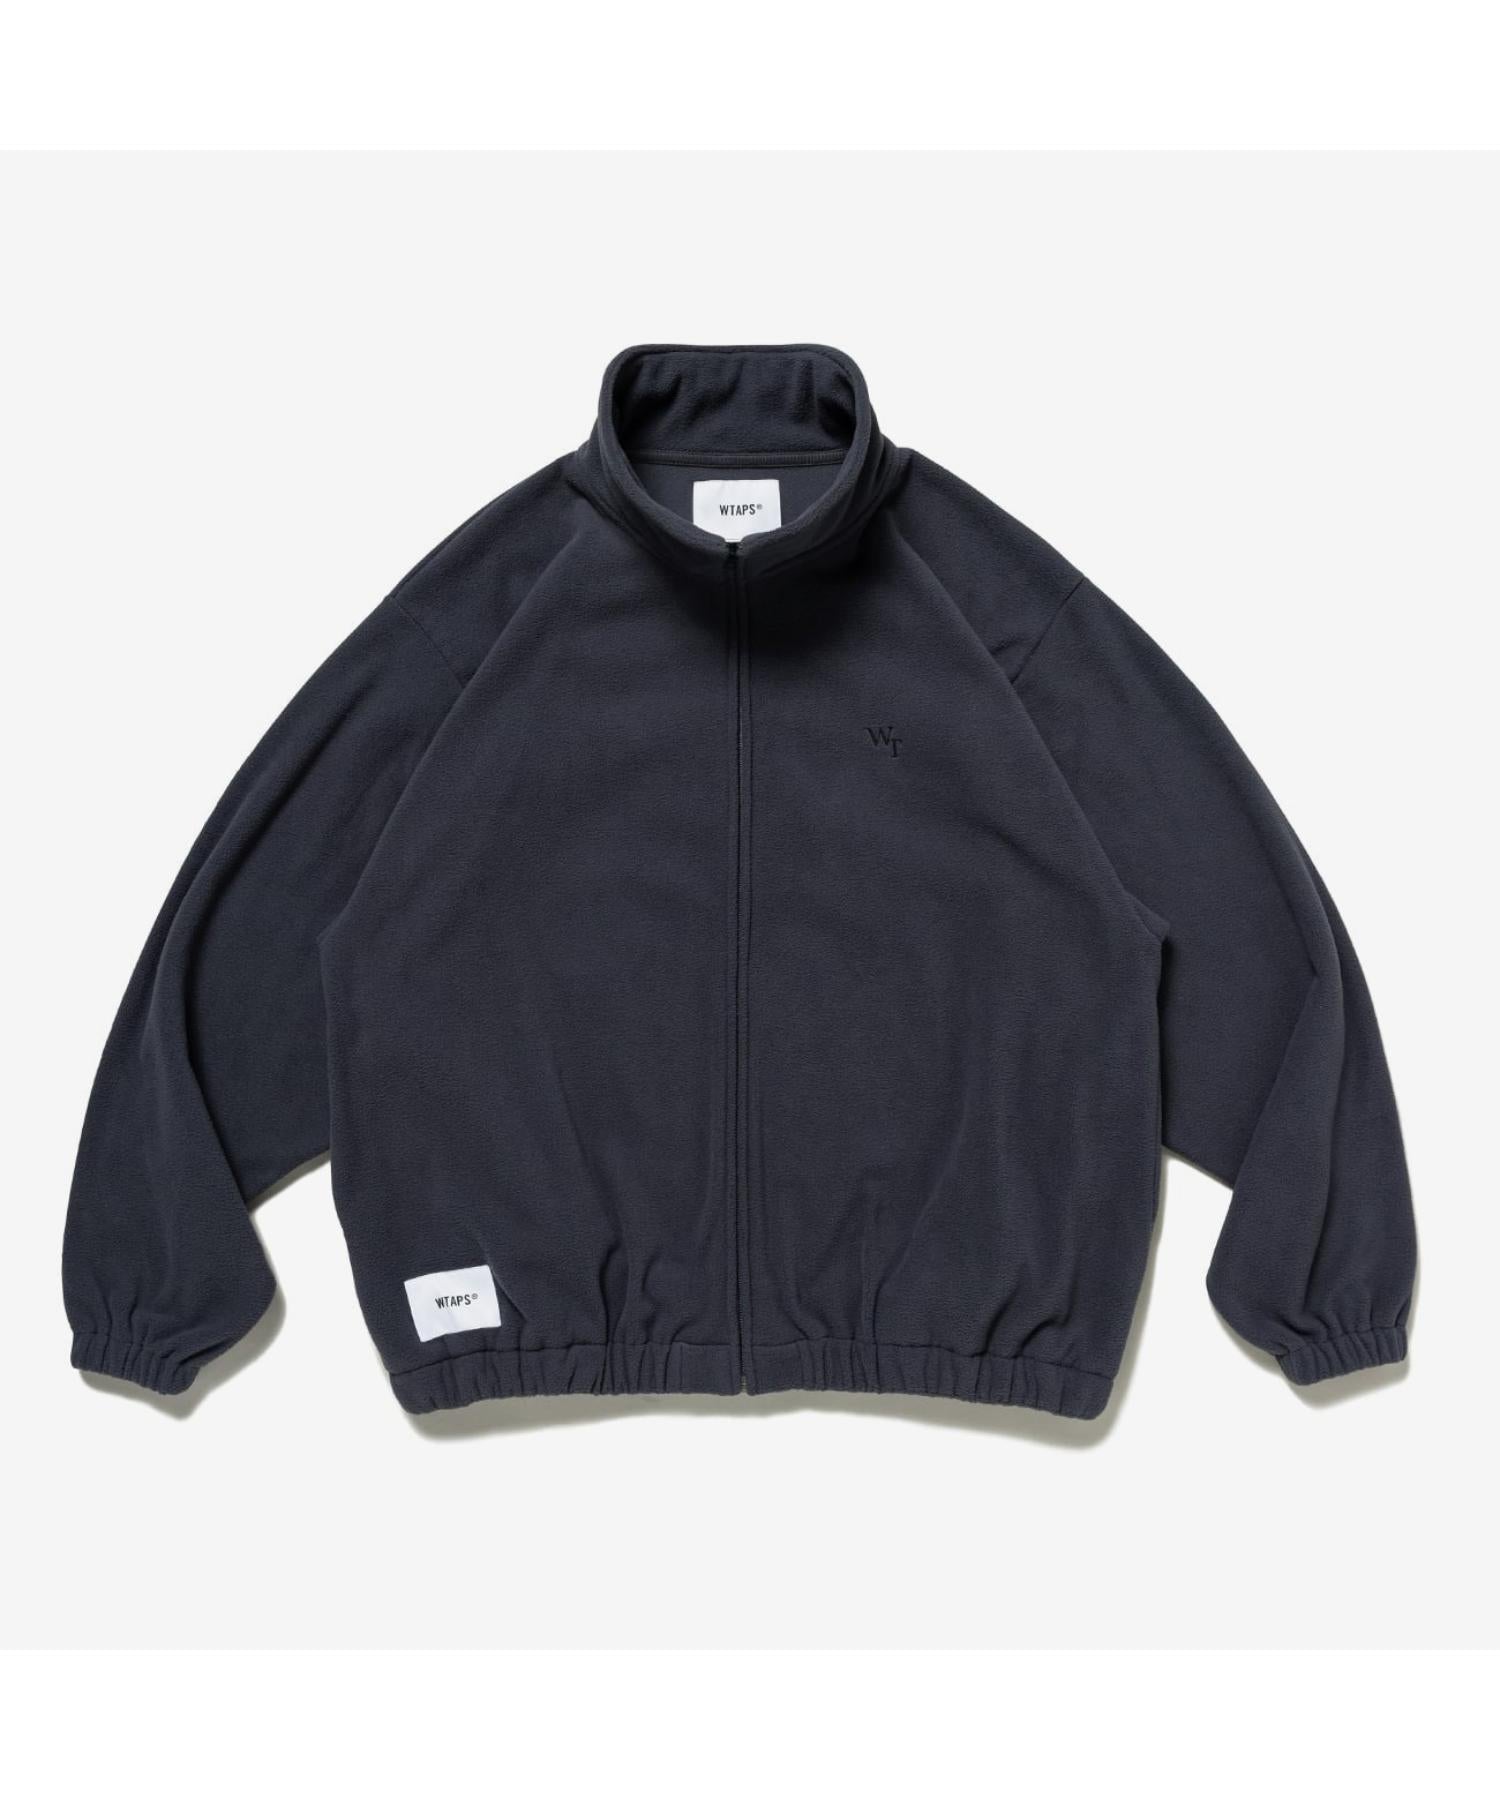 CHIEF / SWEATER / POLY. LEAGUE - WTAPS (ダブルタップス) - tops 